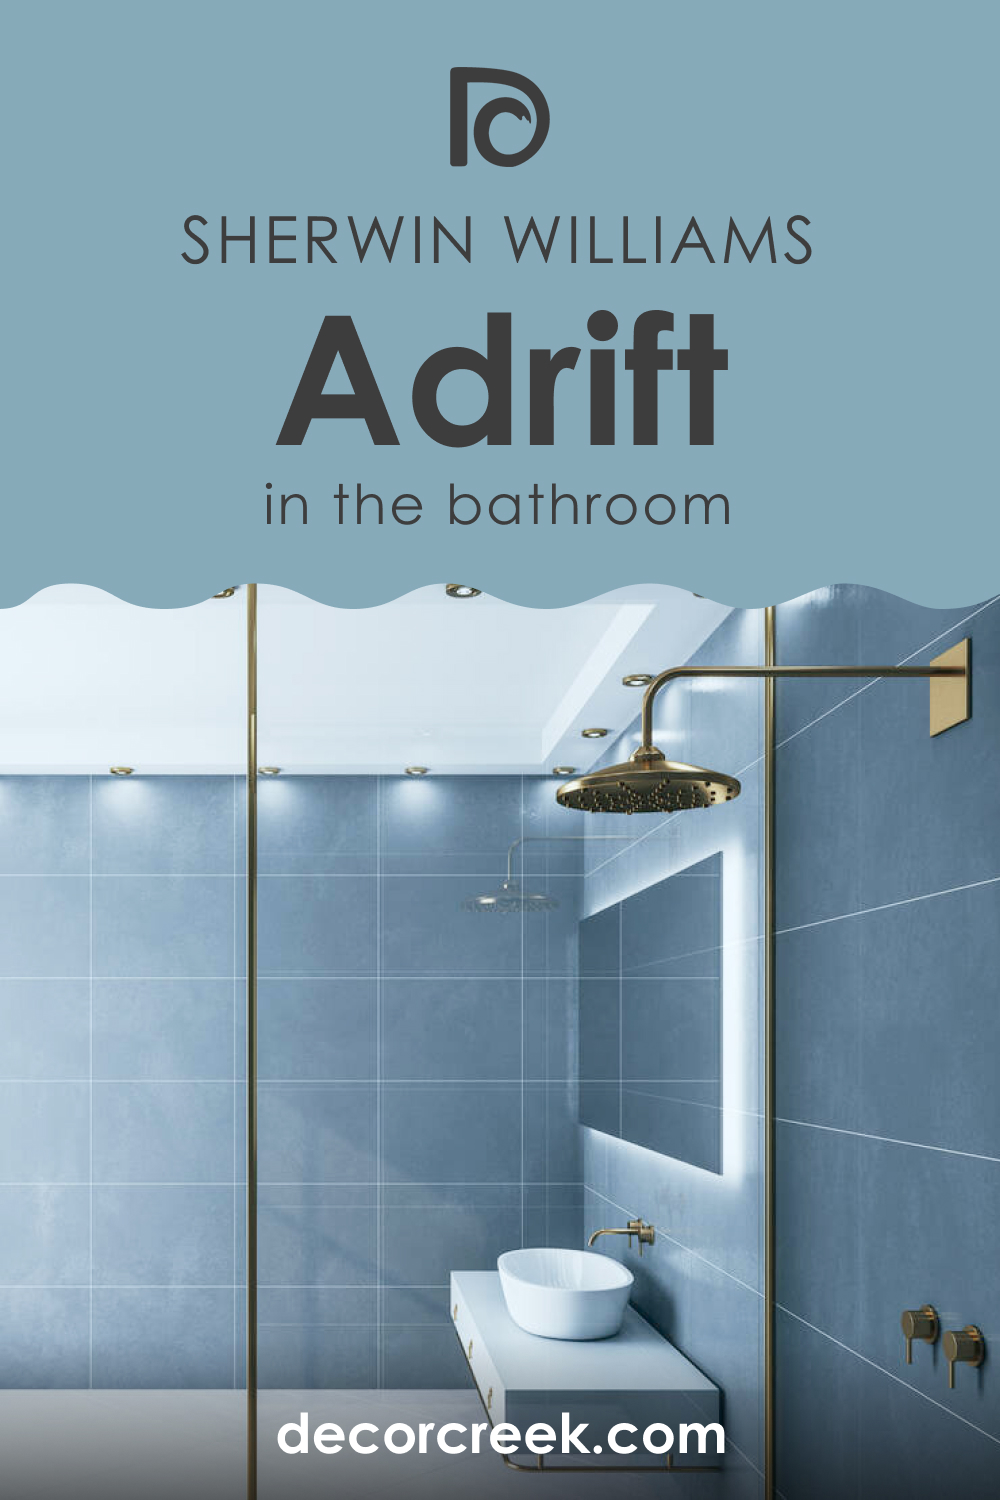 How to Use SW 7608 Adrift in the Bathroom?